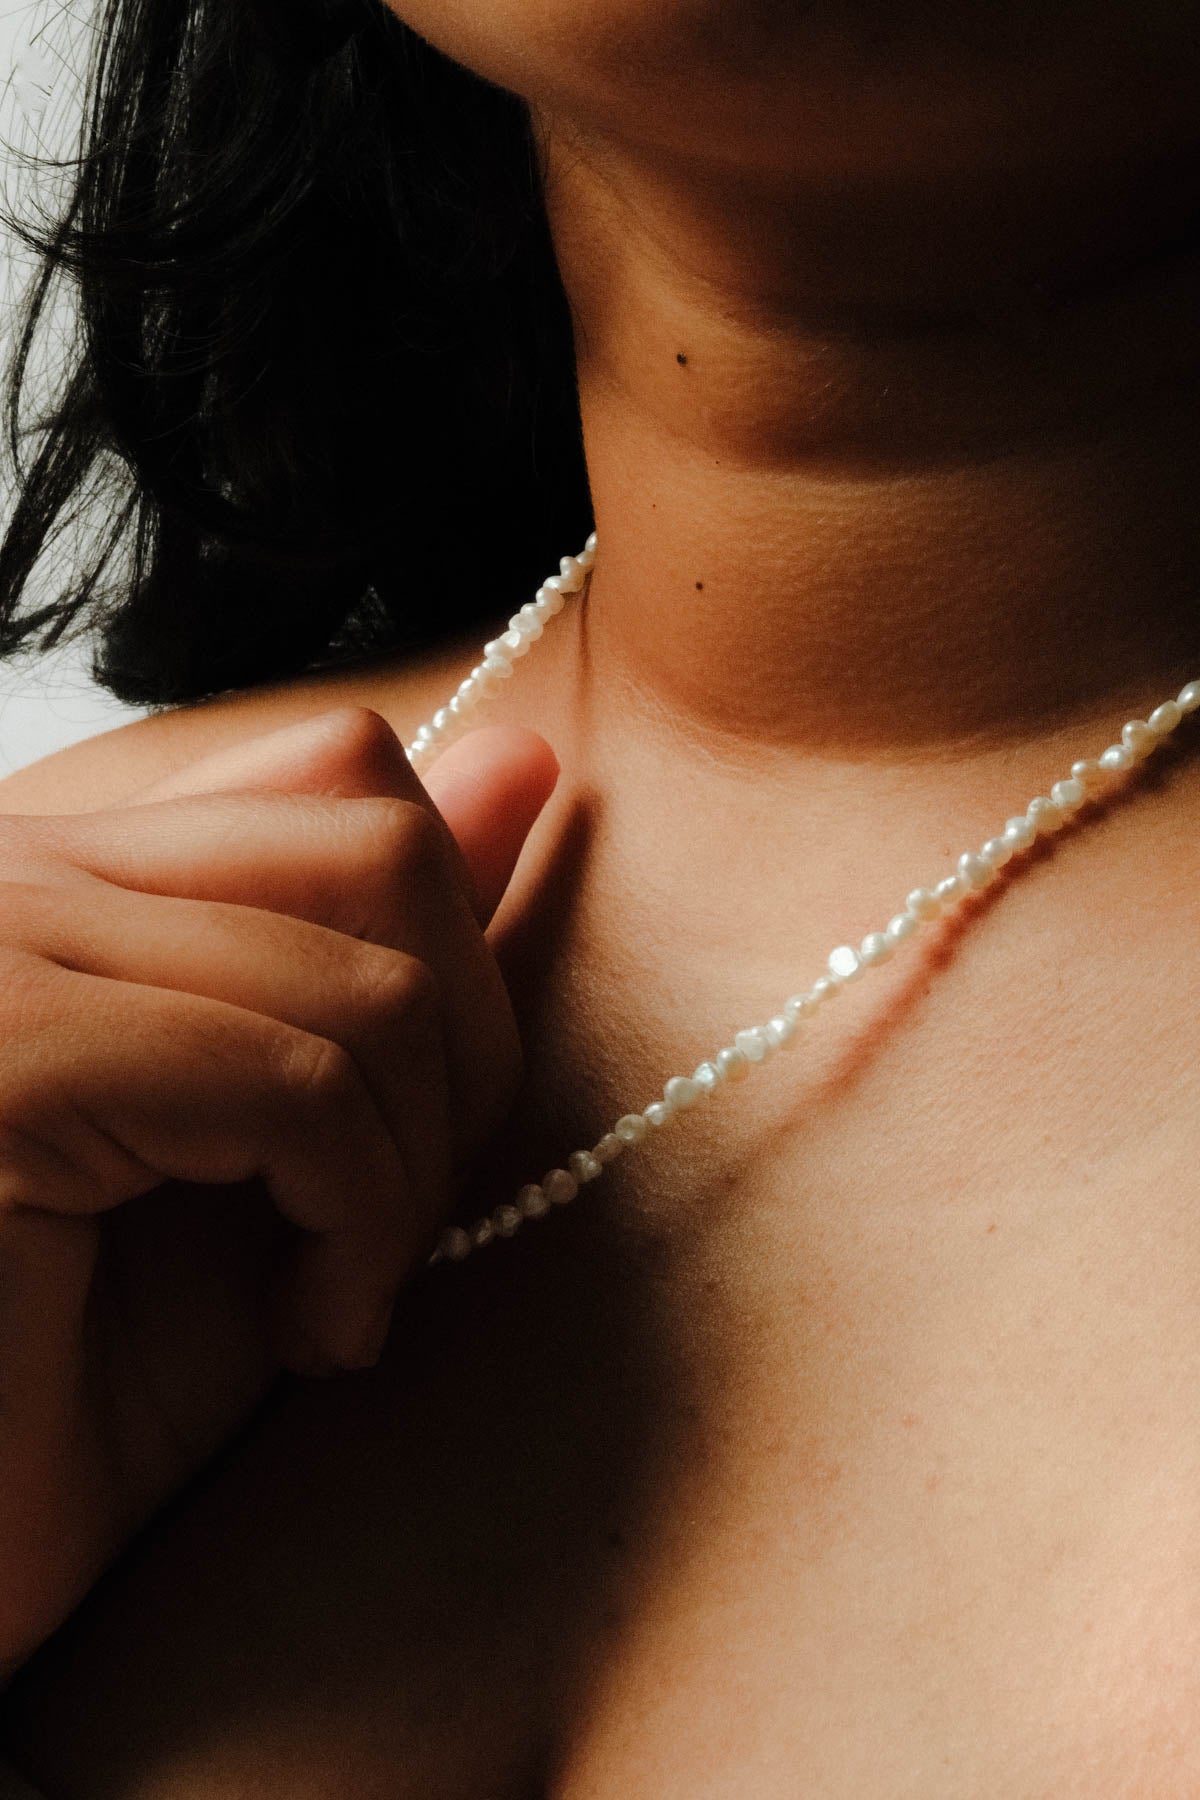 Seed Pearl Strand Necklace